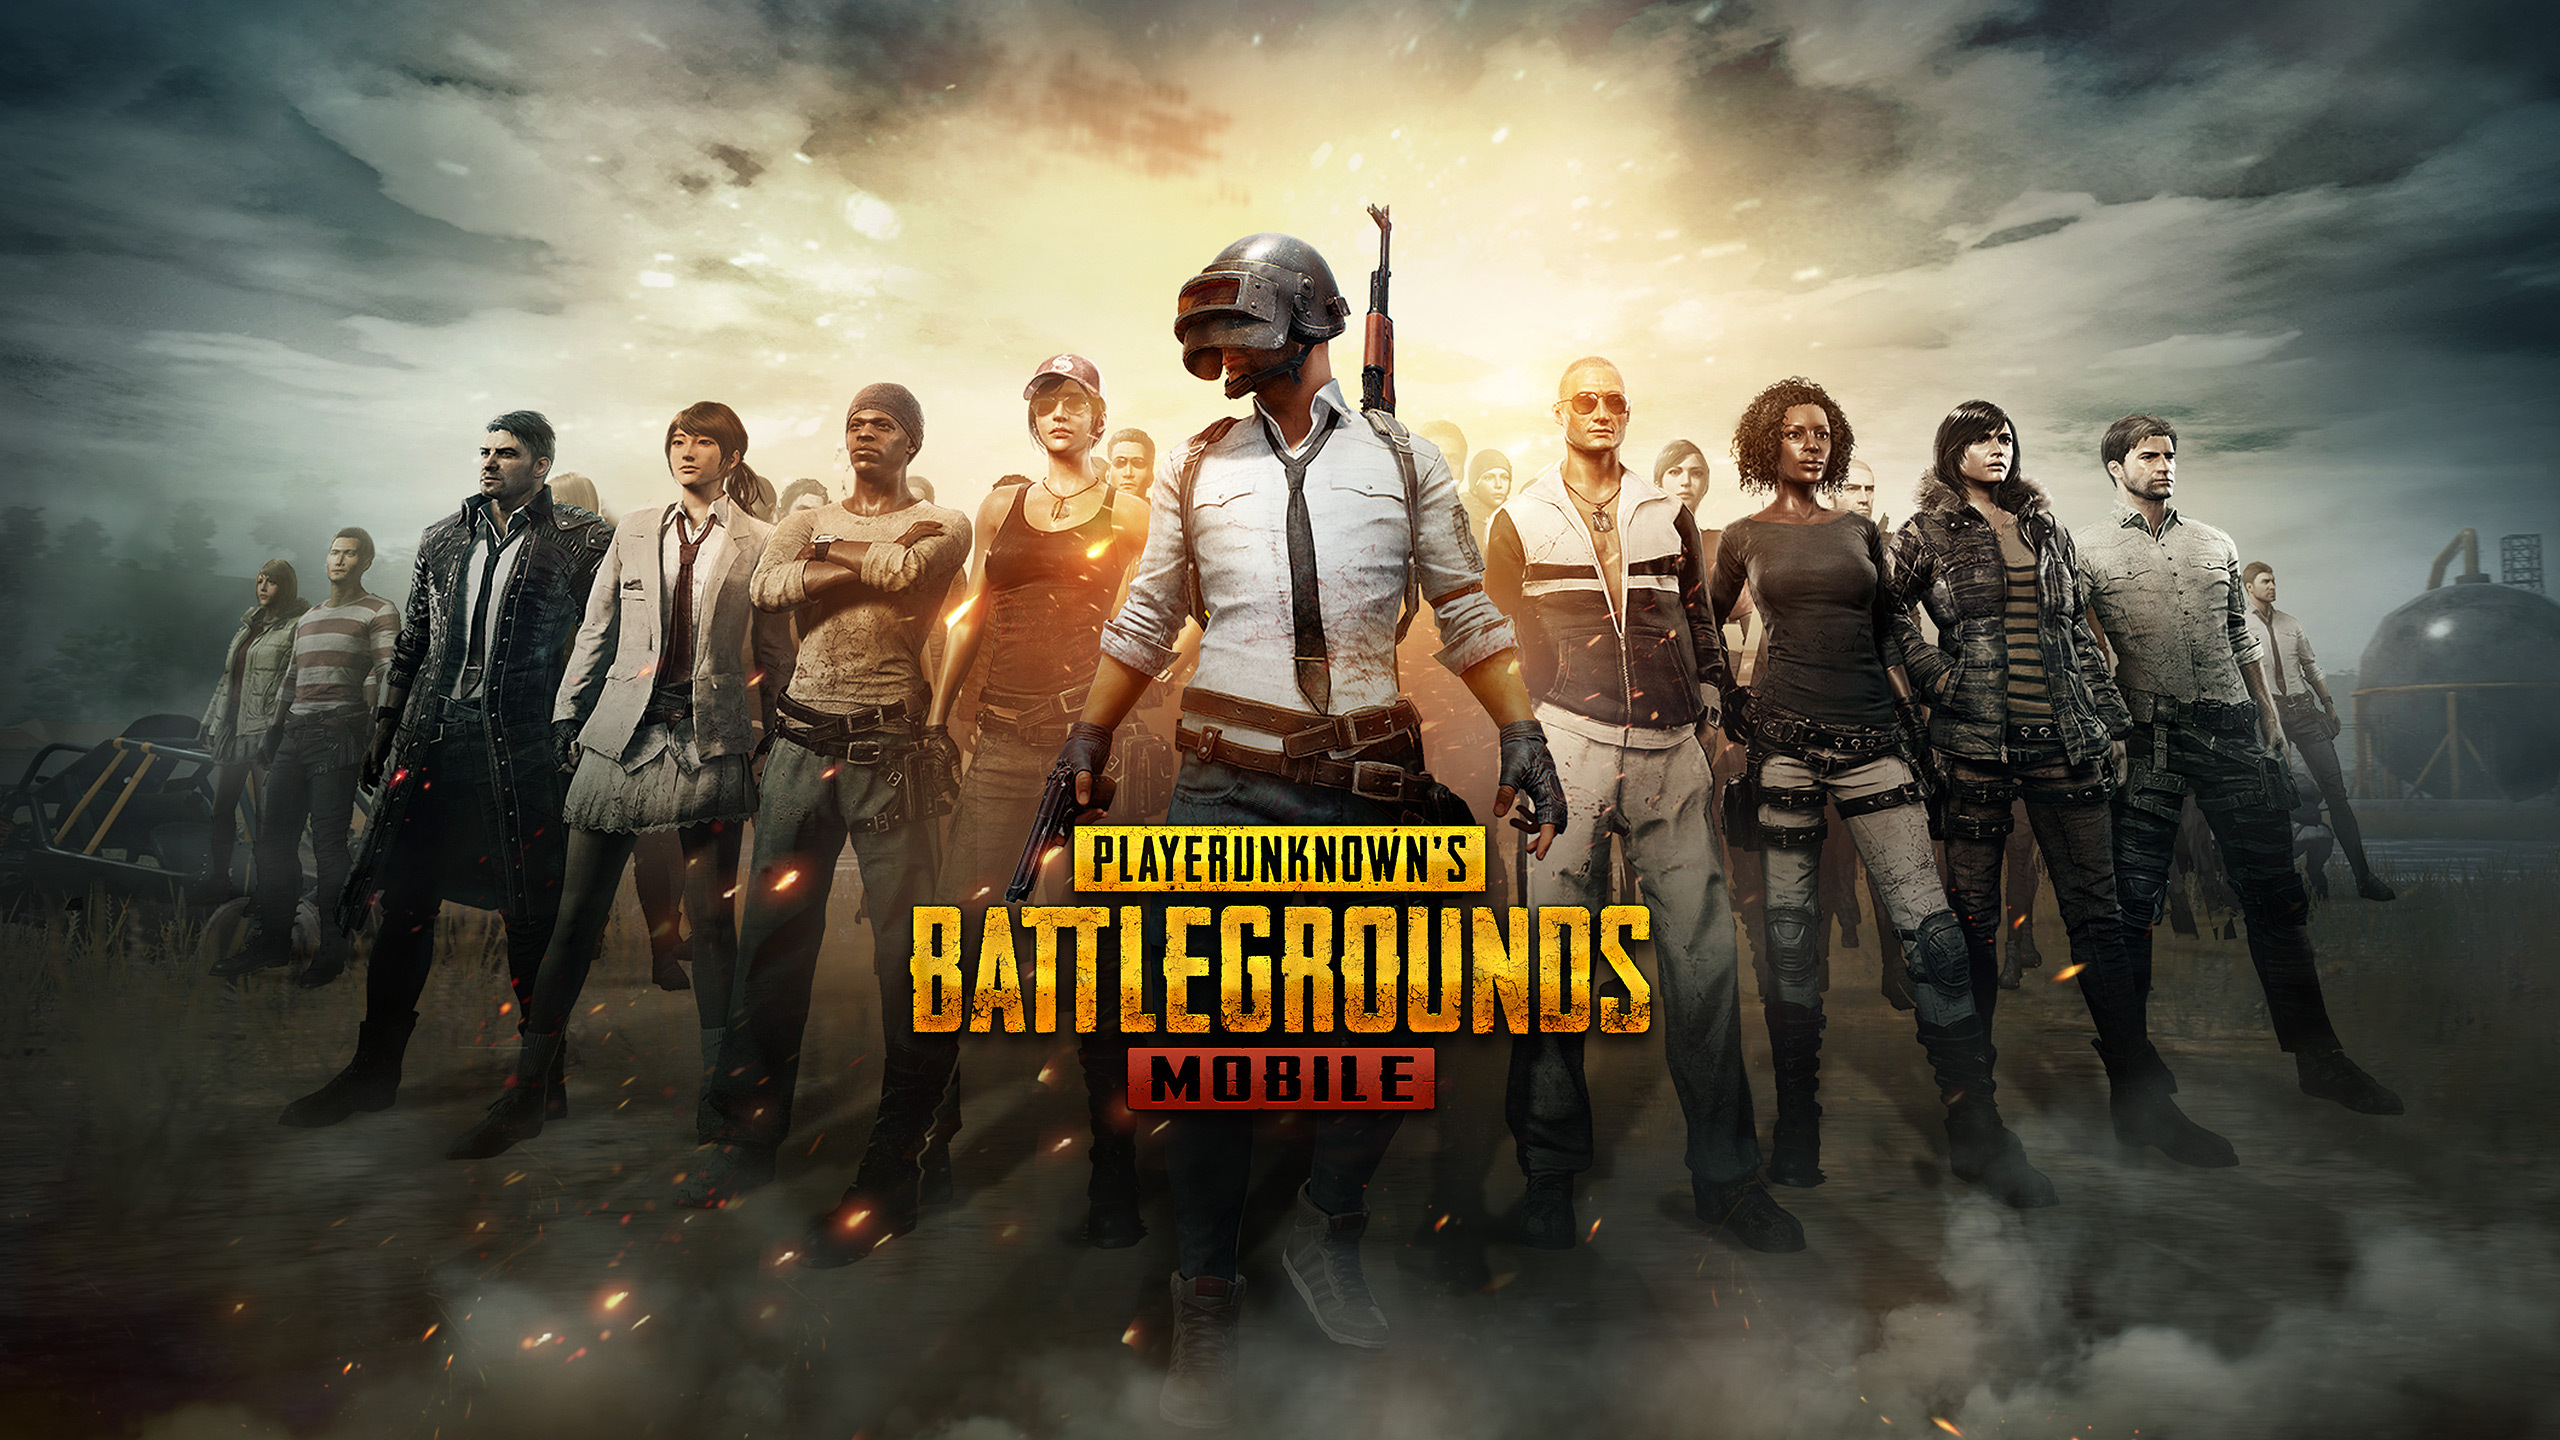 Pubg Mobile Wallpaper 4k Pc 13 Book Source For Free Download HD, 4K & High Quality Wallpaper